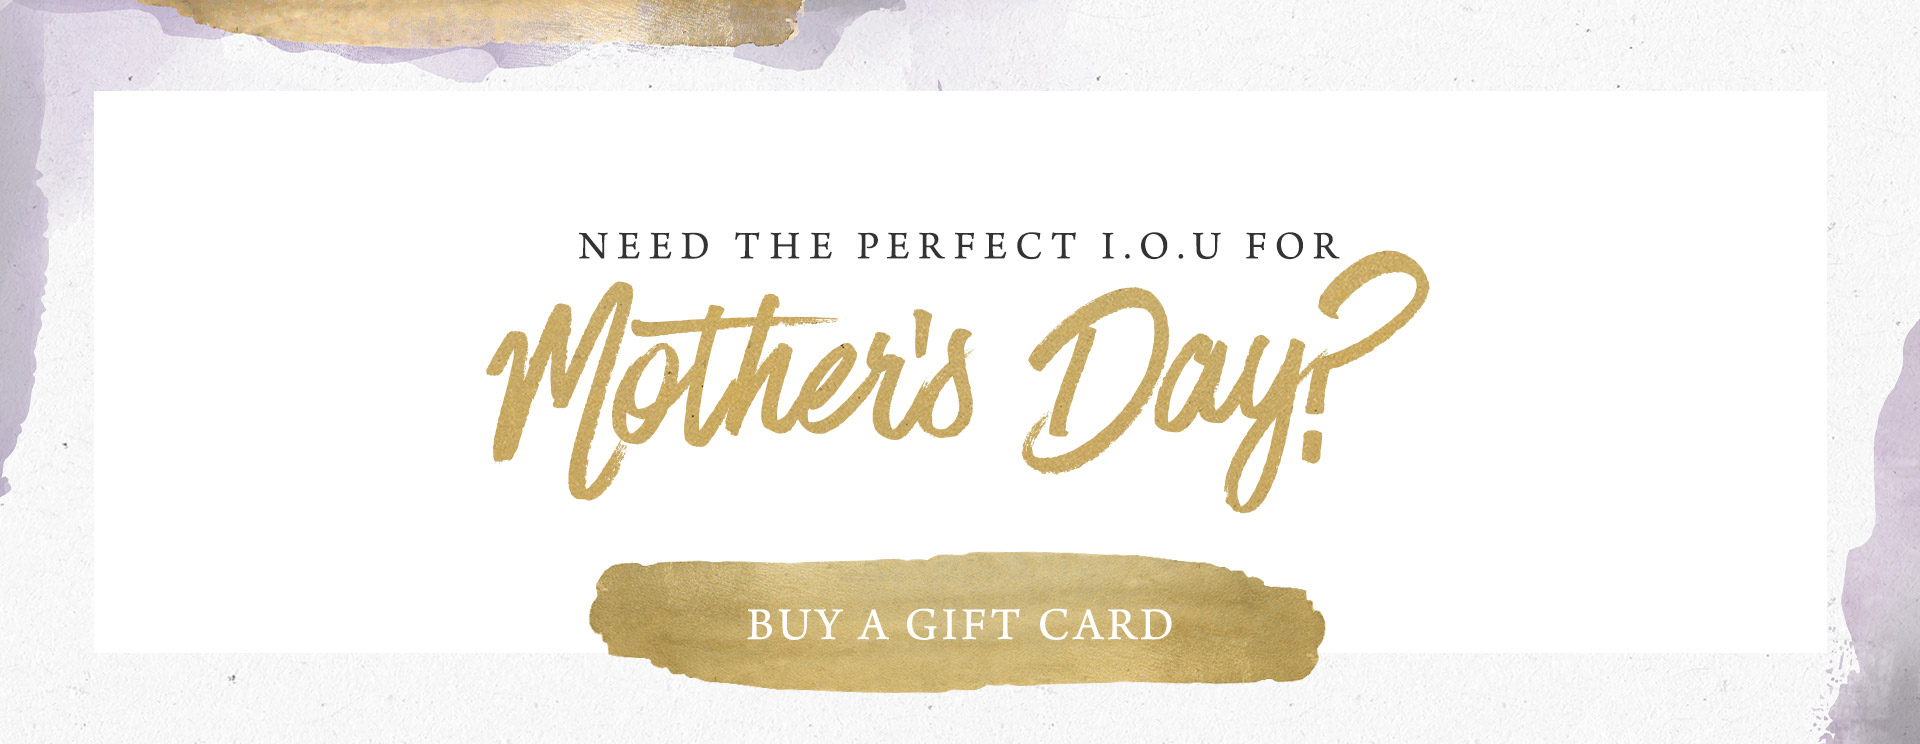 Mother's Day 2019 at The Midland